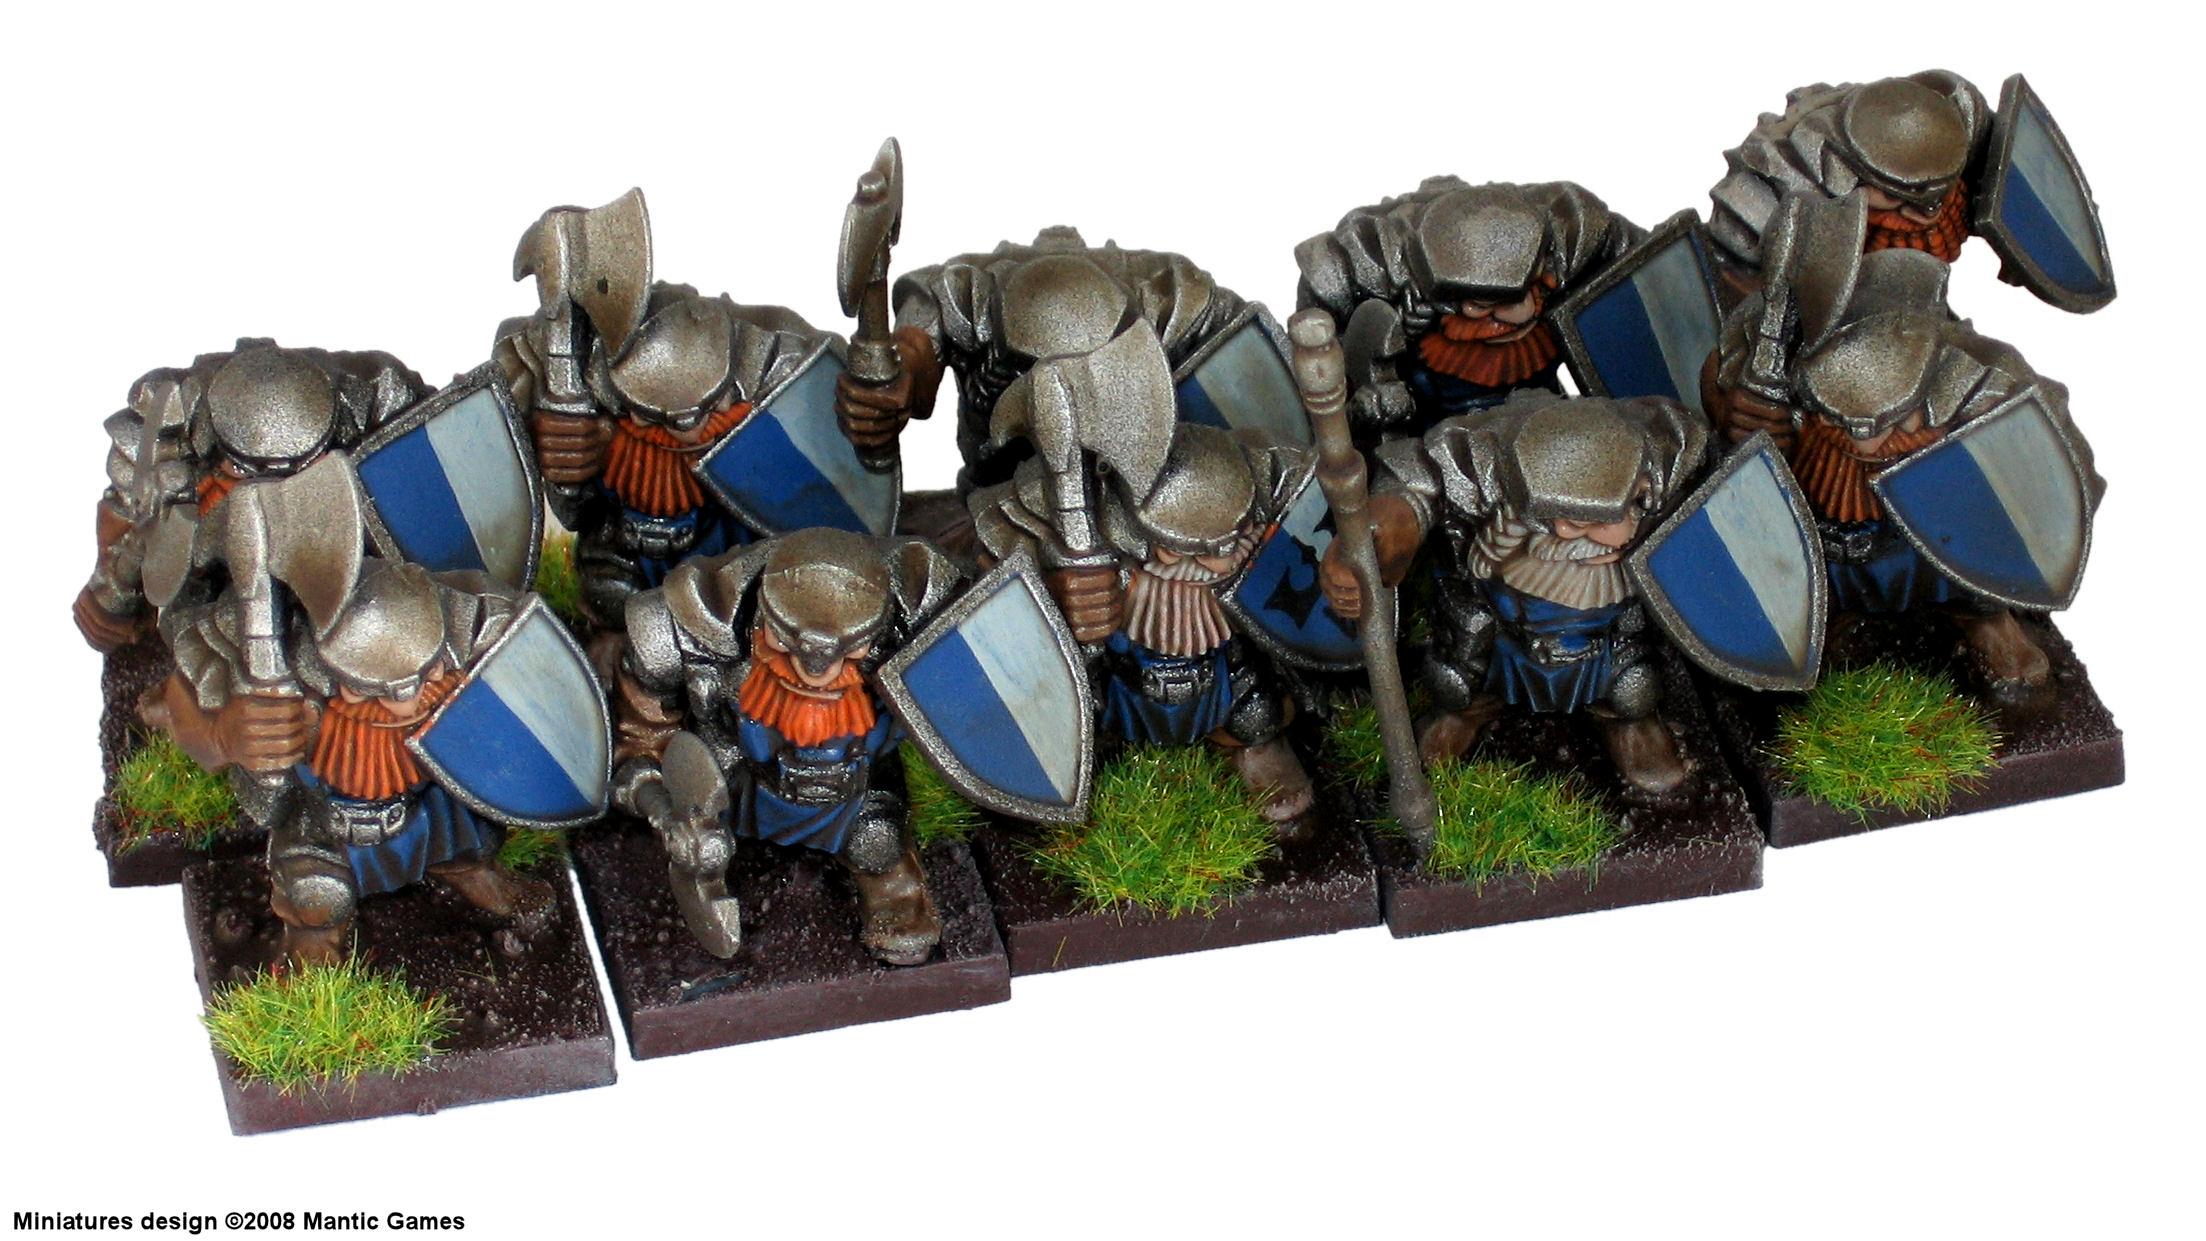  The Army Painter Kings of War Dwarfs Painting Set - 10 Acrylic  Paints for Painting Fantasy Dwarf Infantry and Warmachines - Wargames  Miniature Model Painting : Toys & Games